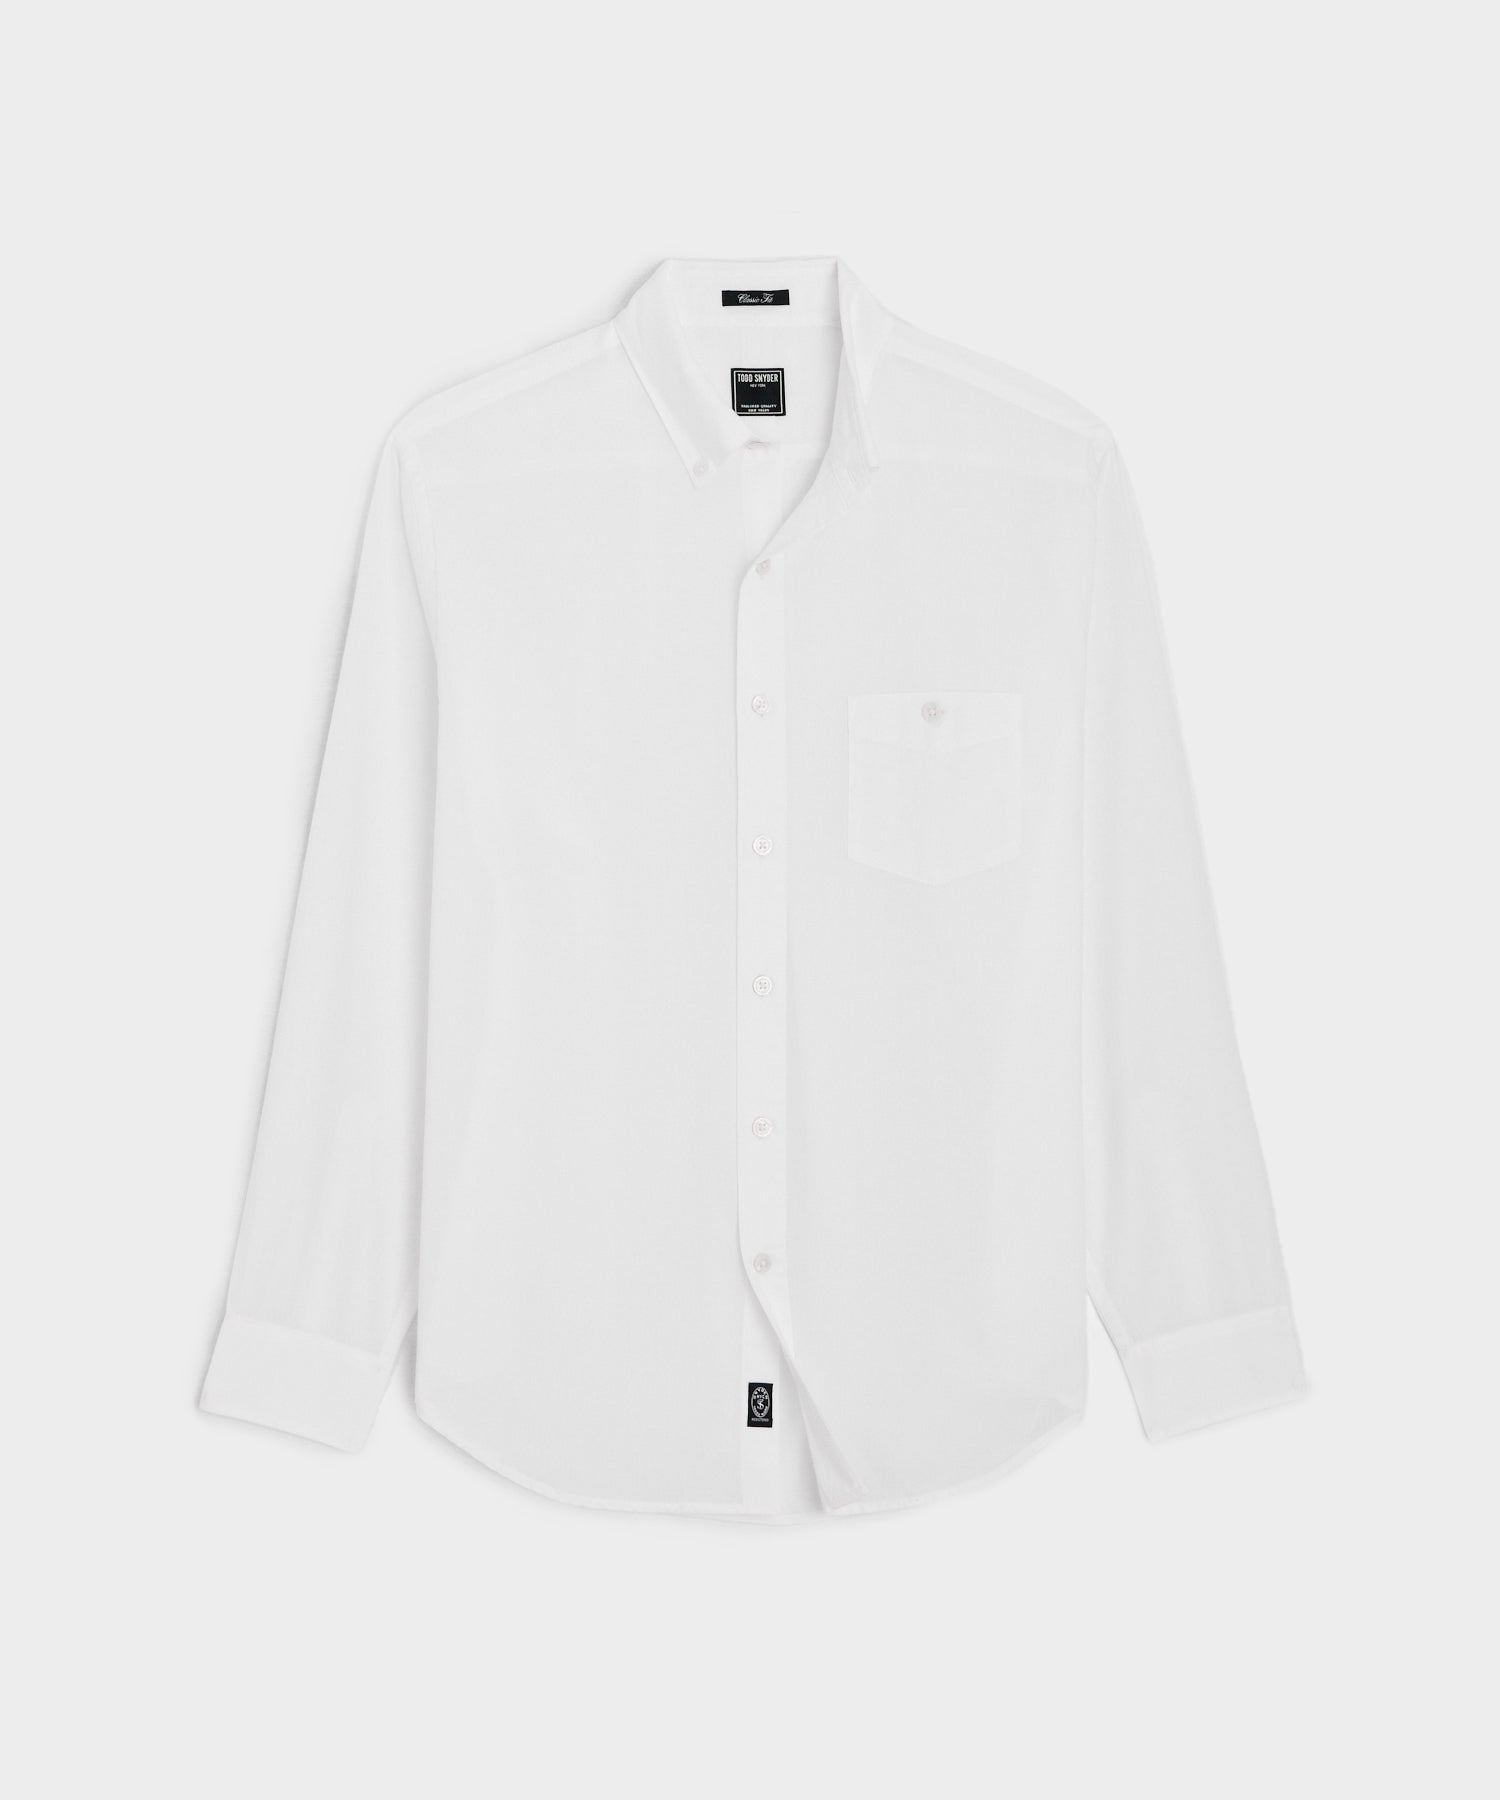 Classic Fit Summerweight Favorite Shirt in White